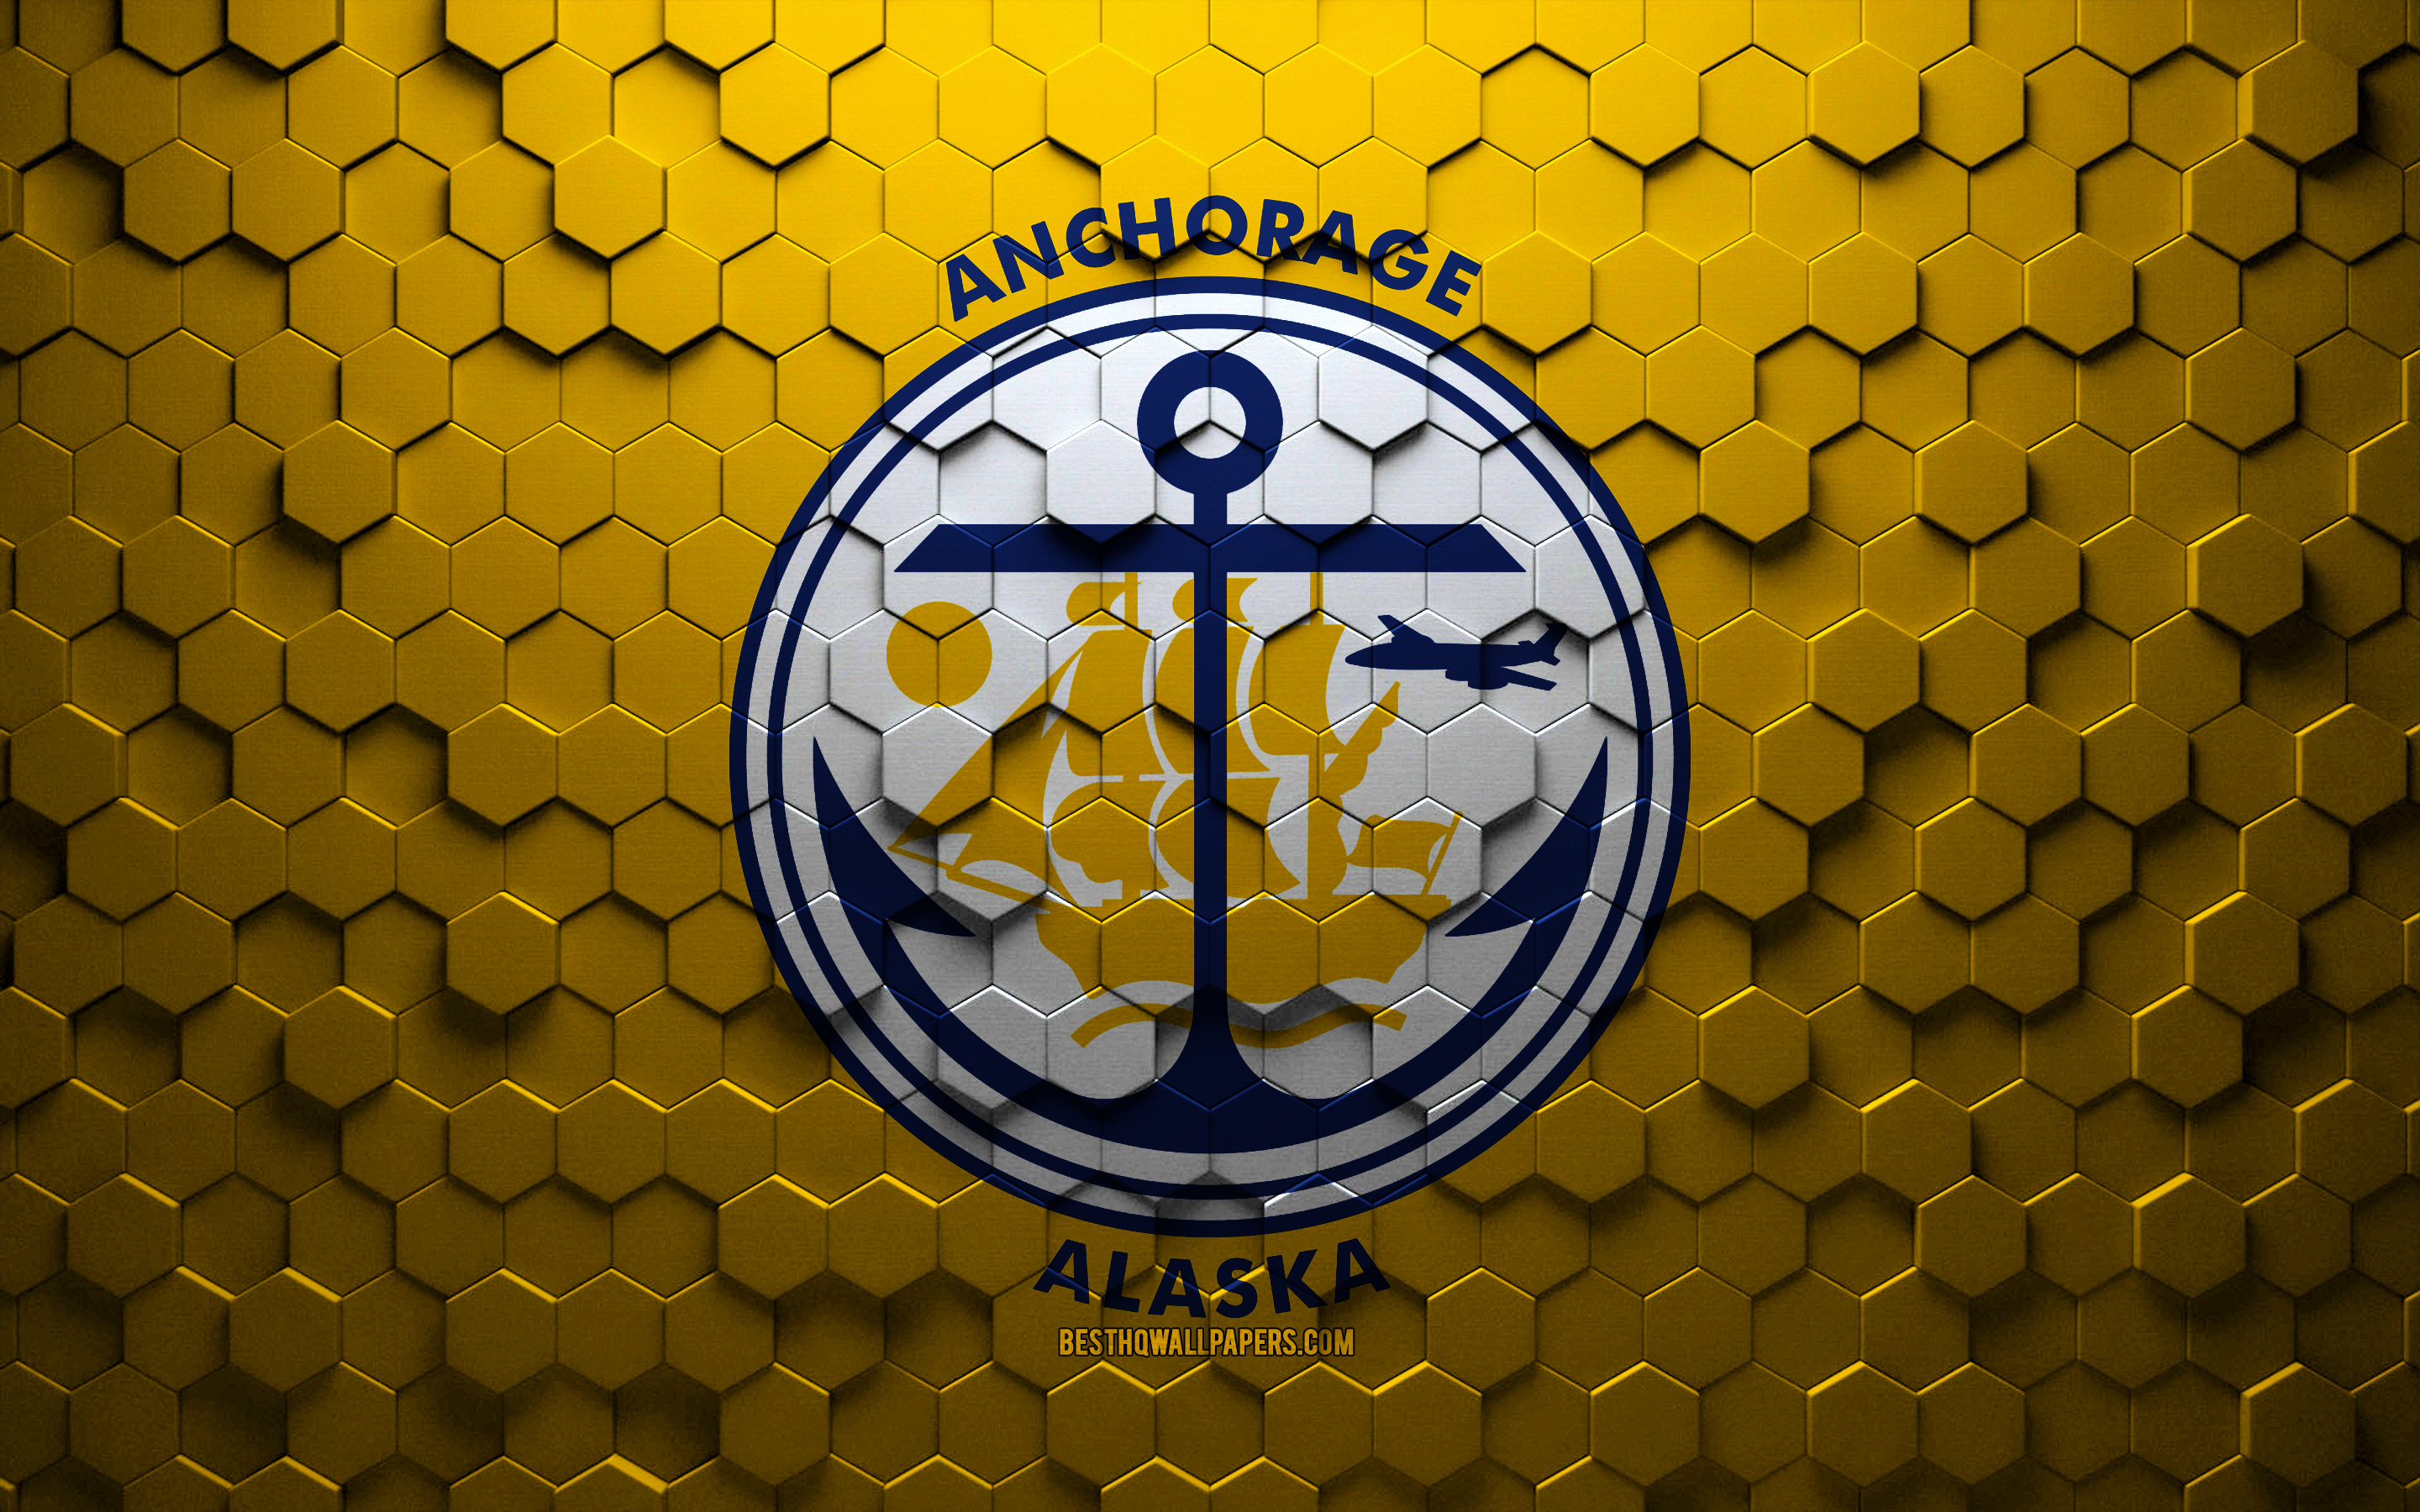 Download wallpaper Flag of Anchorage, Alaska, honeycomb art, Anchorage hexagons flag, Anchorage, 3D hexagons art, Anchorage flag for desktop with resolution 2880x1800. High Quality HD picture wallpaper